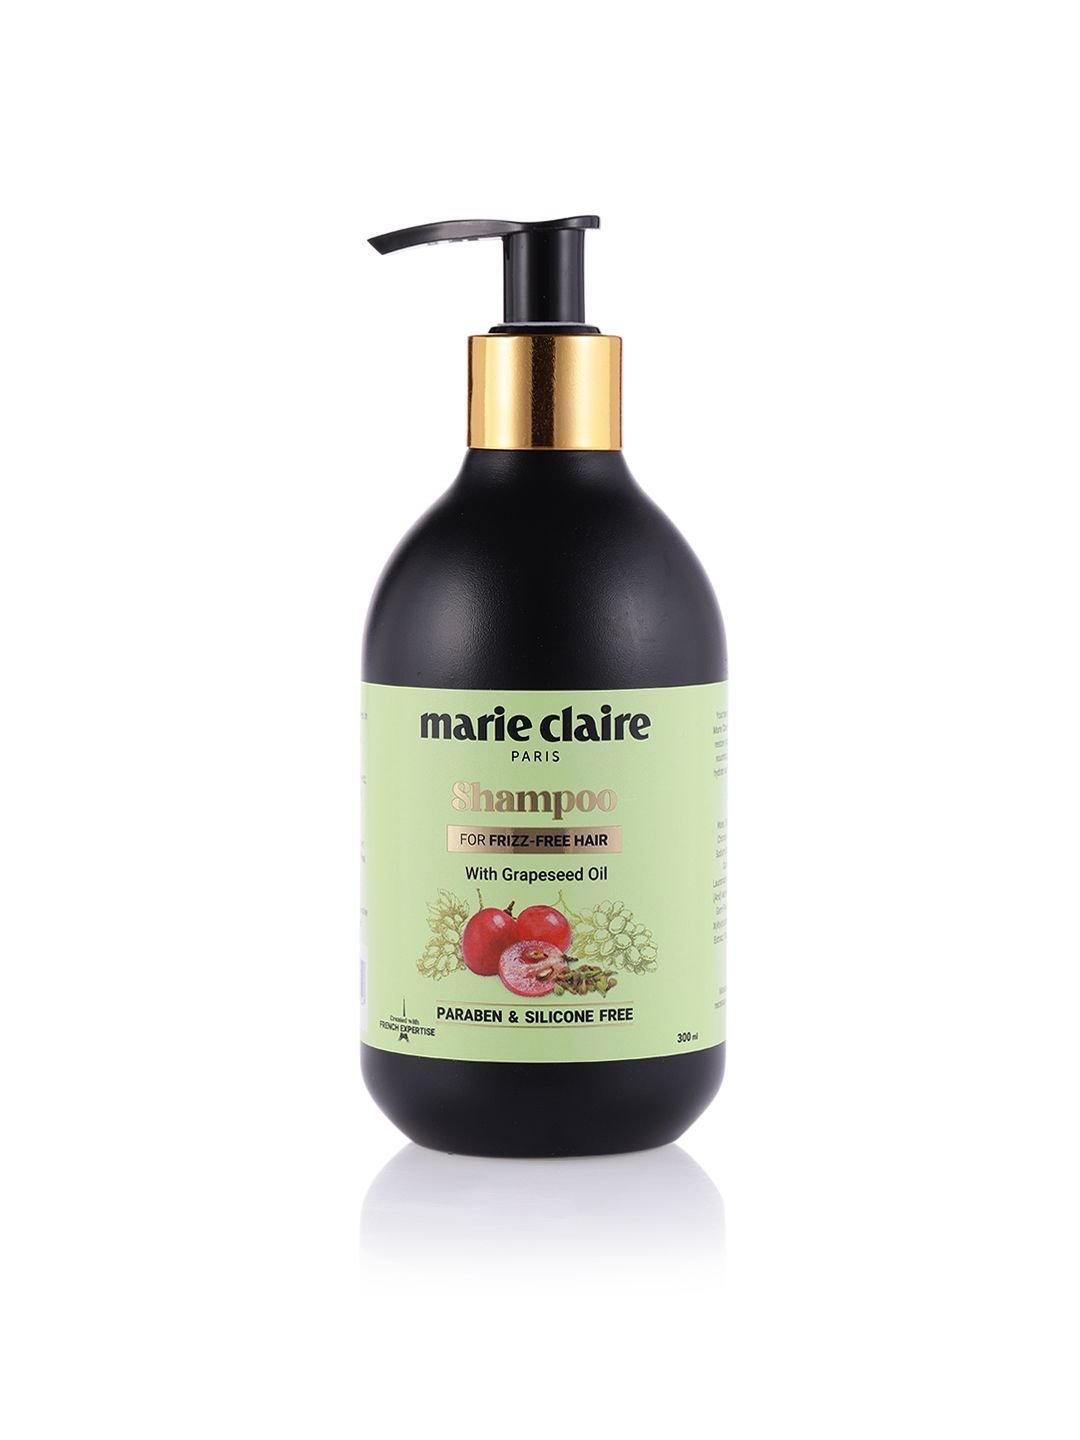 Marie Claire Shampoo For Frizz Free Hair 300 ml Price in India